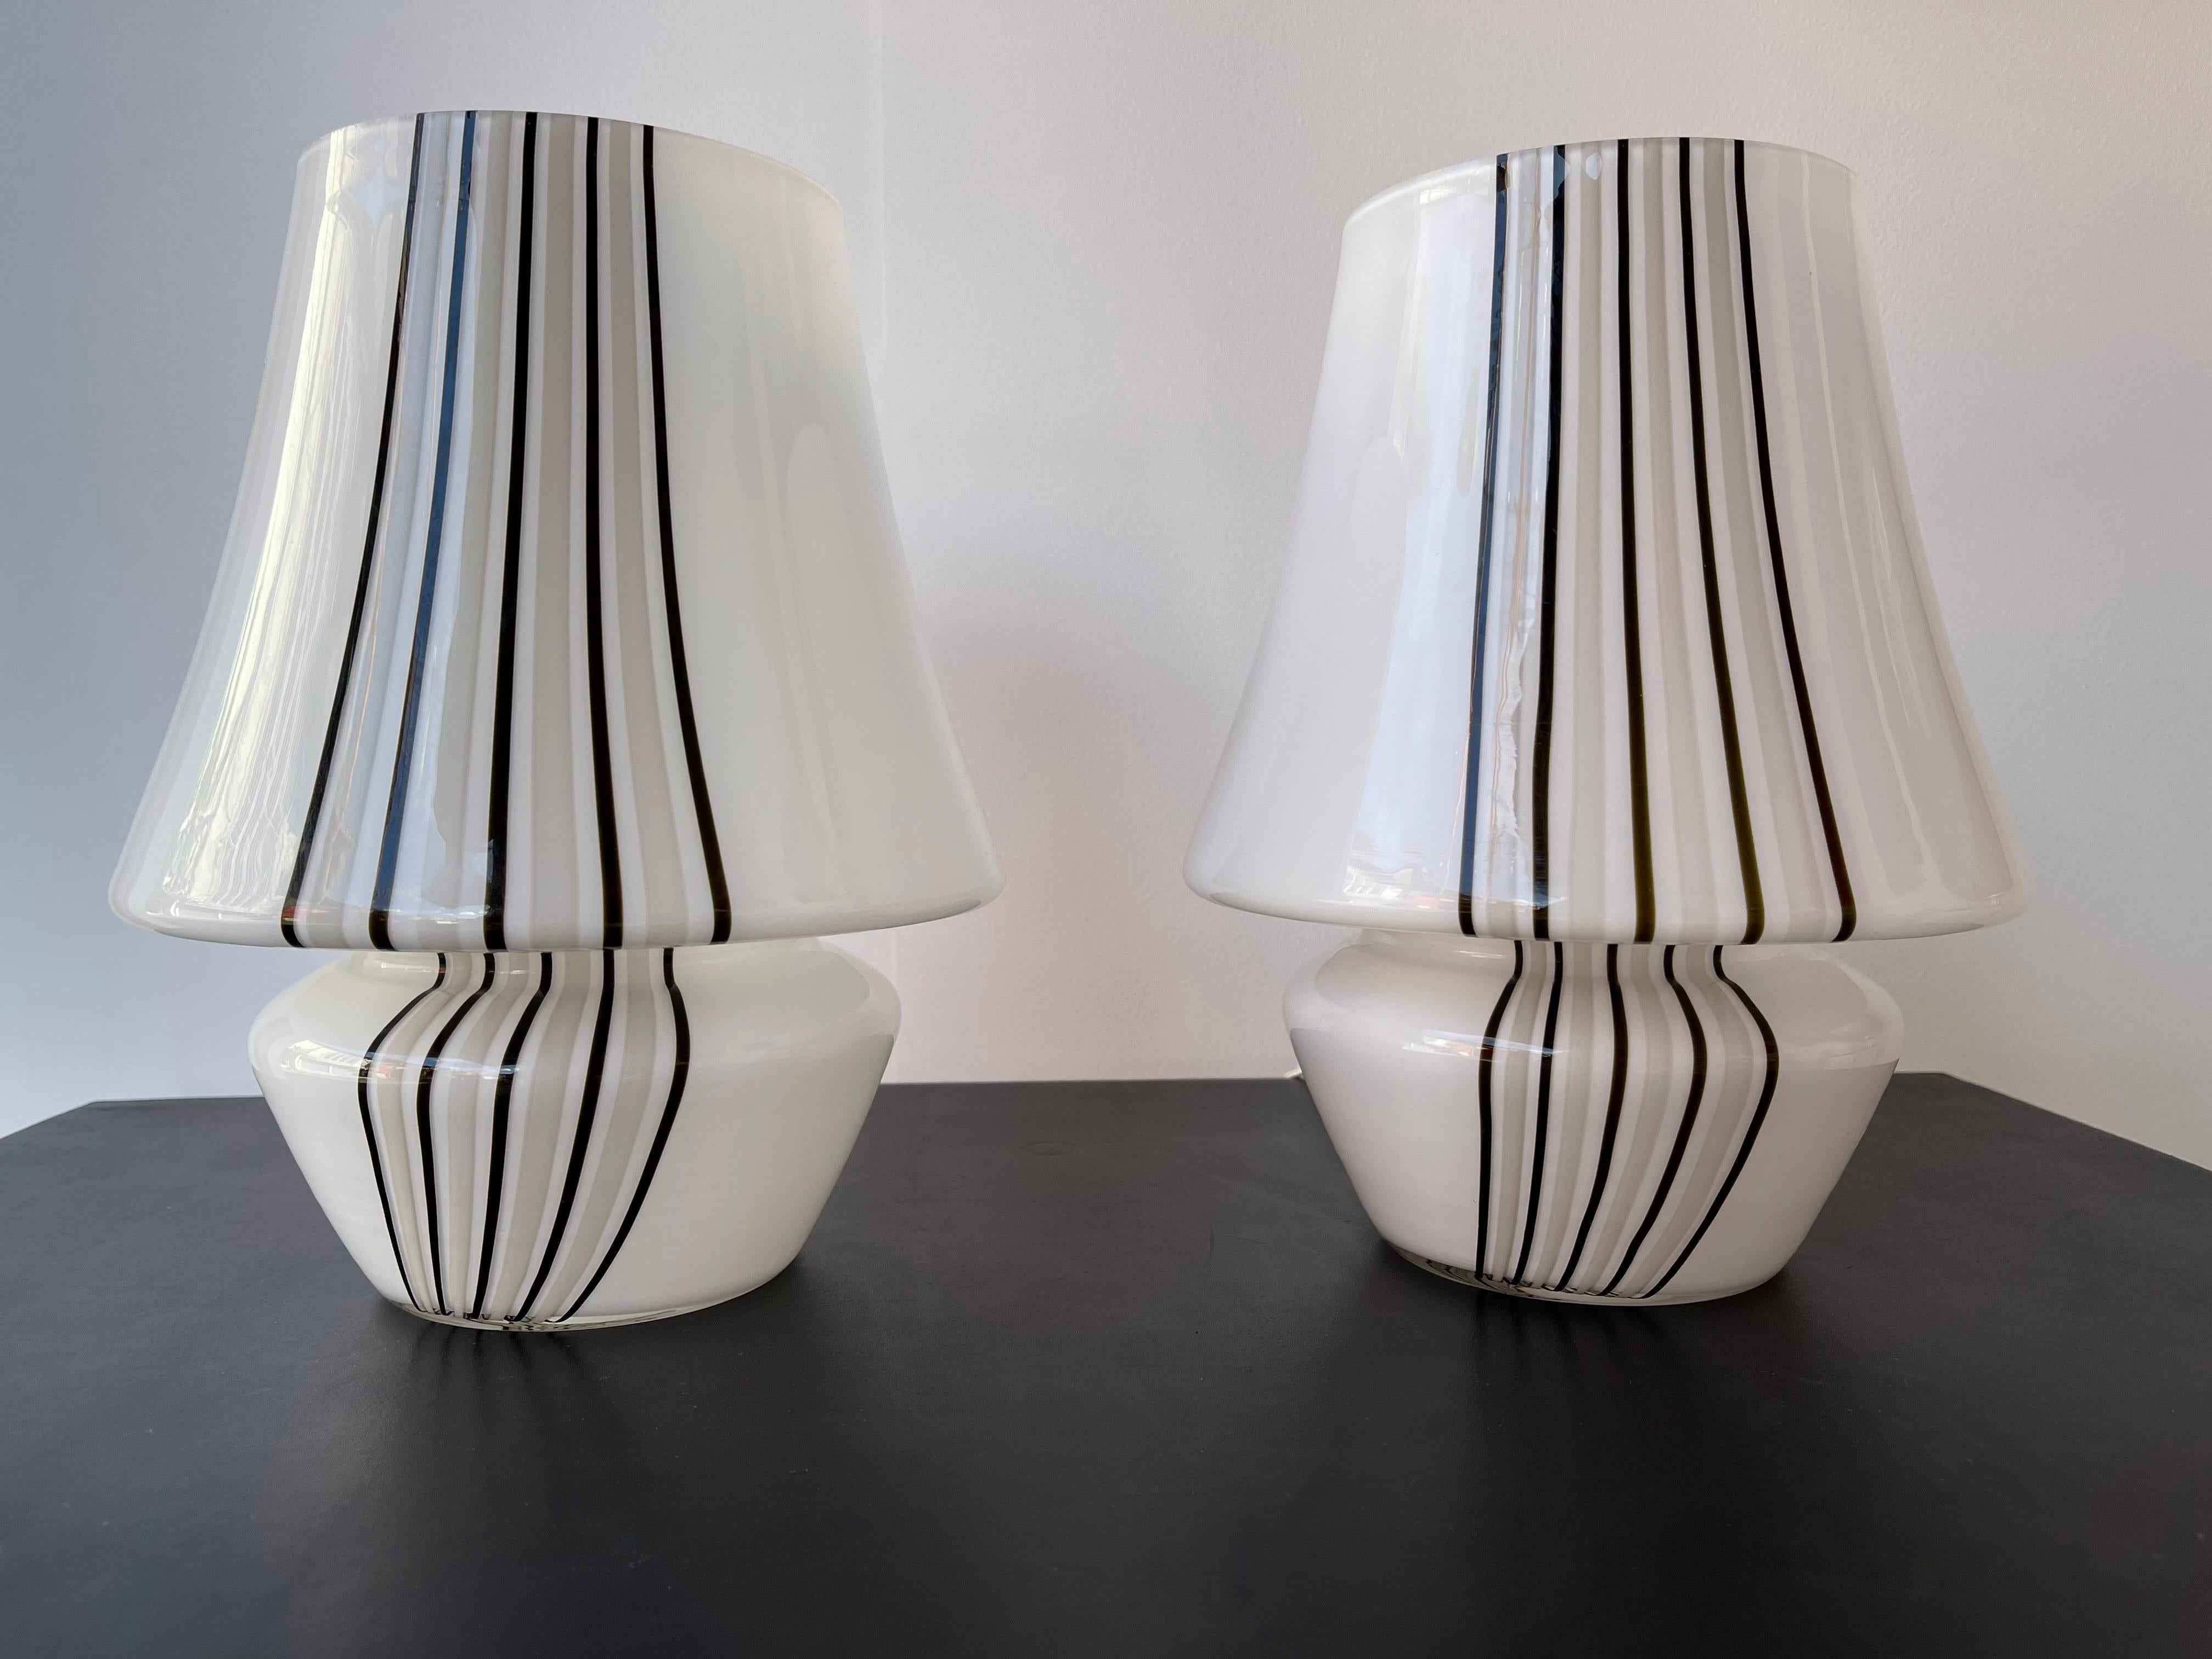 Late 20th Century Pair of Stripe Murano Glass Lamps, Italy, 1970s For Sale